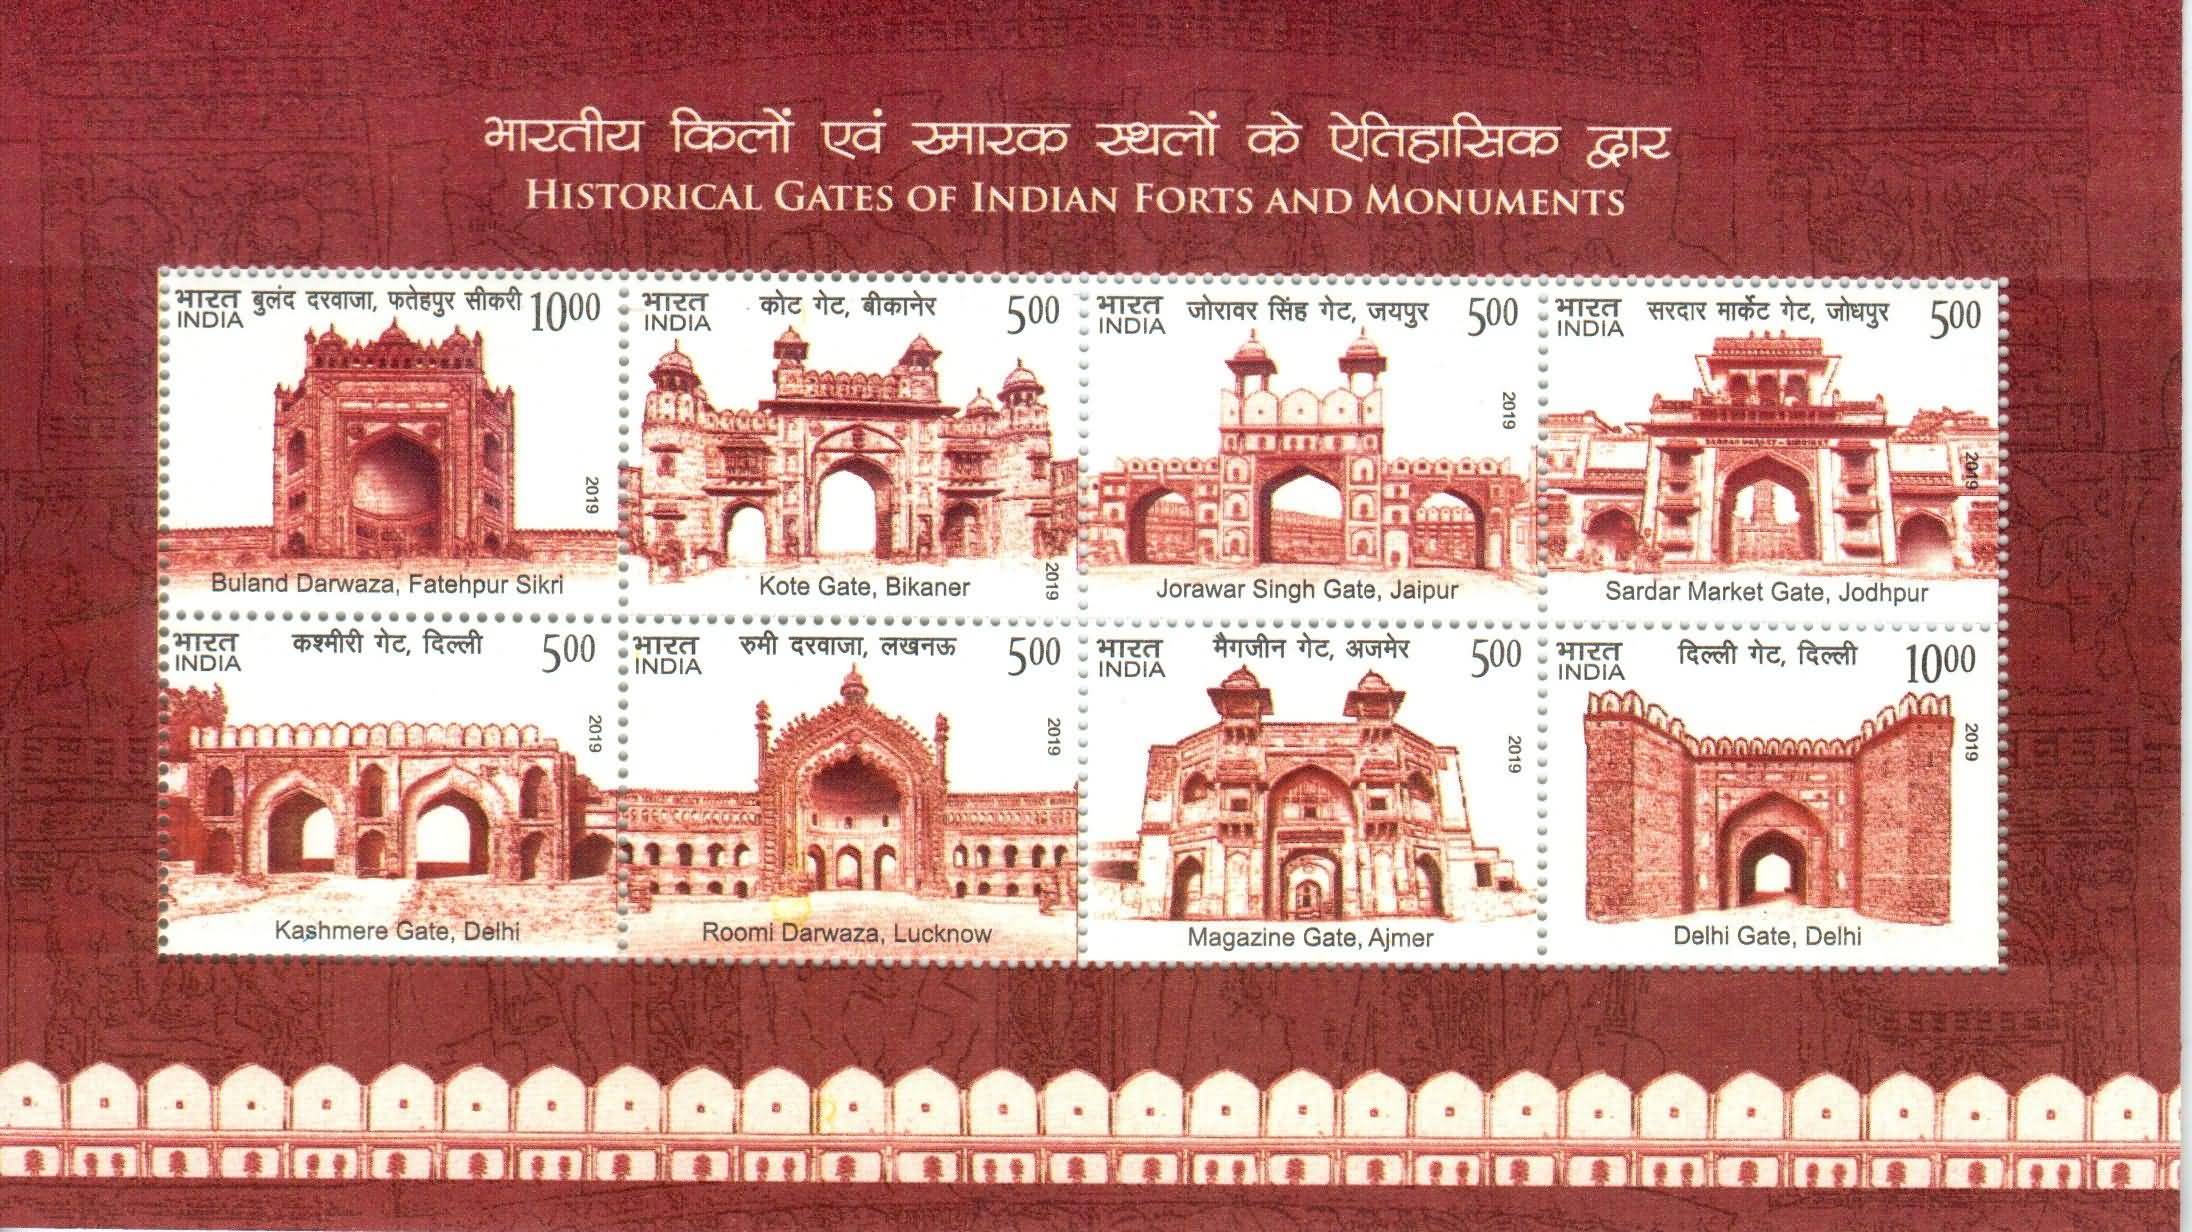 India 2019 Historical Gates of Indian Forts and Monuments Miniature Sheet MNH